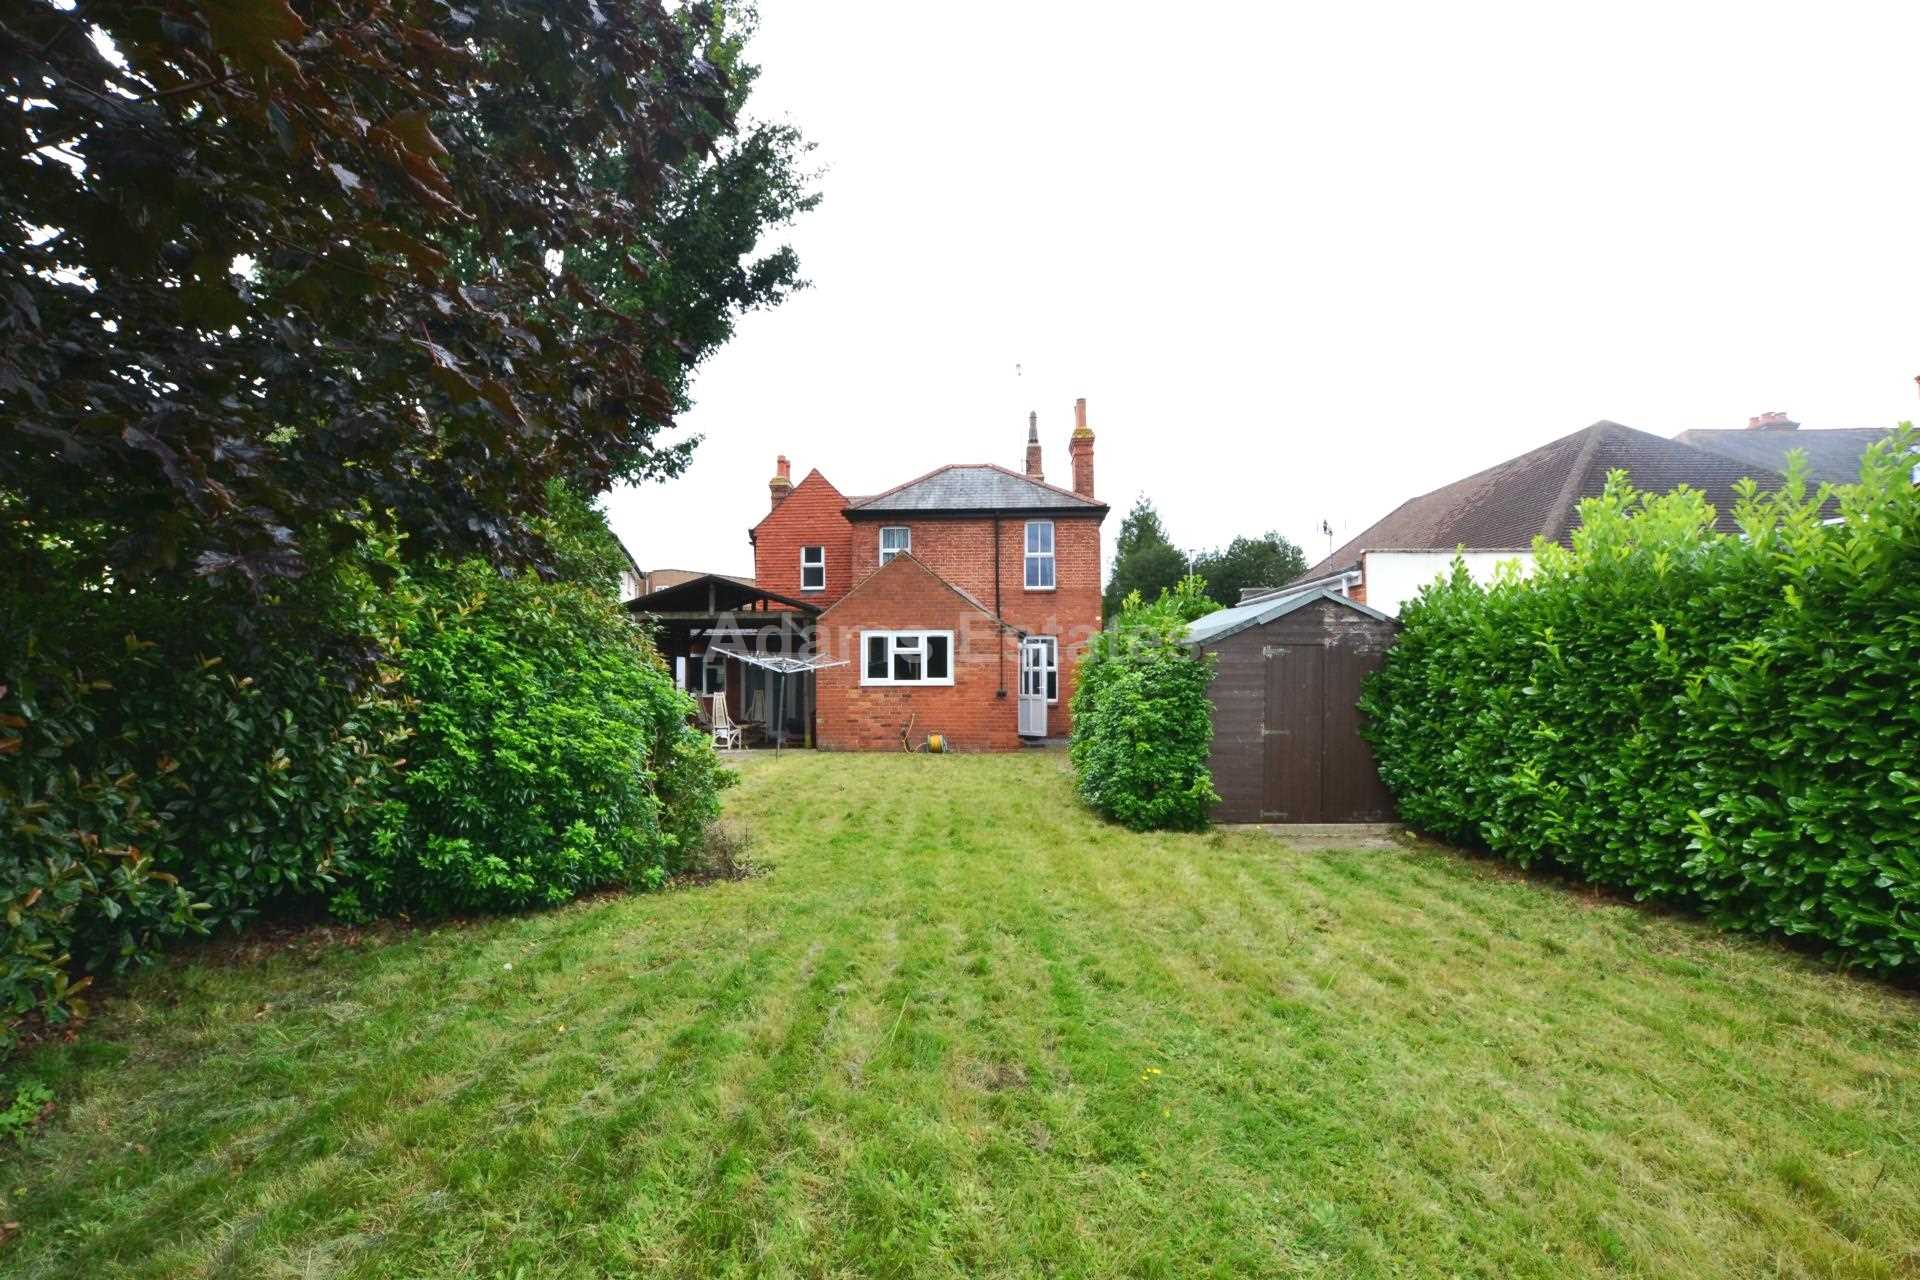 Room 3, Reading Road, Woodley, Image 13